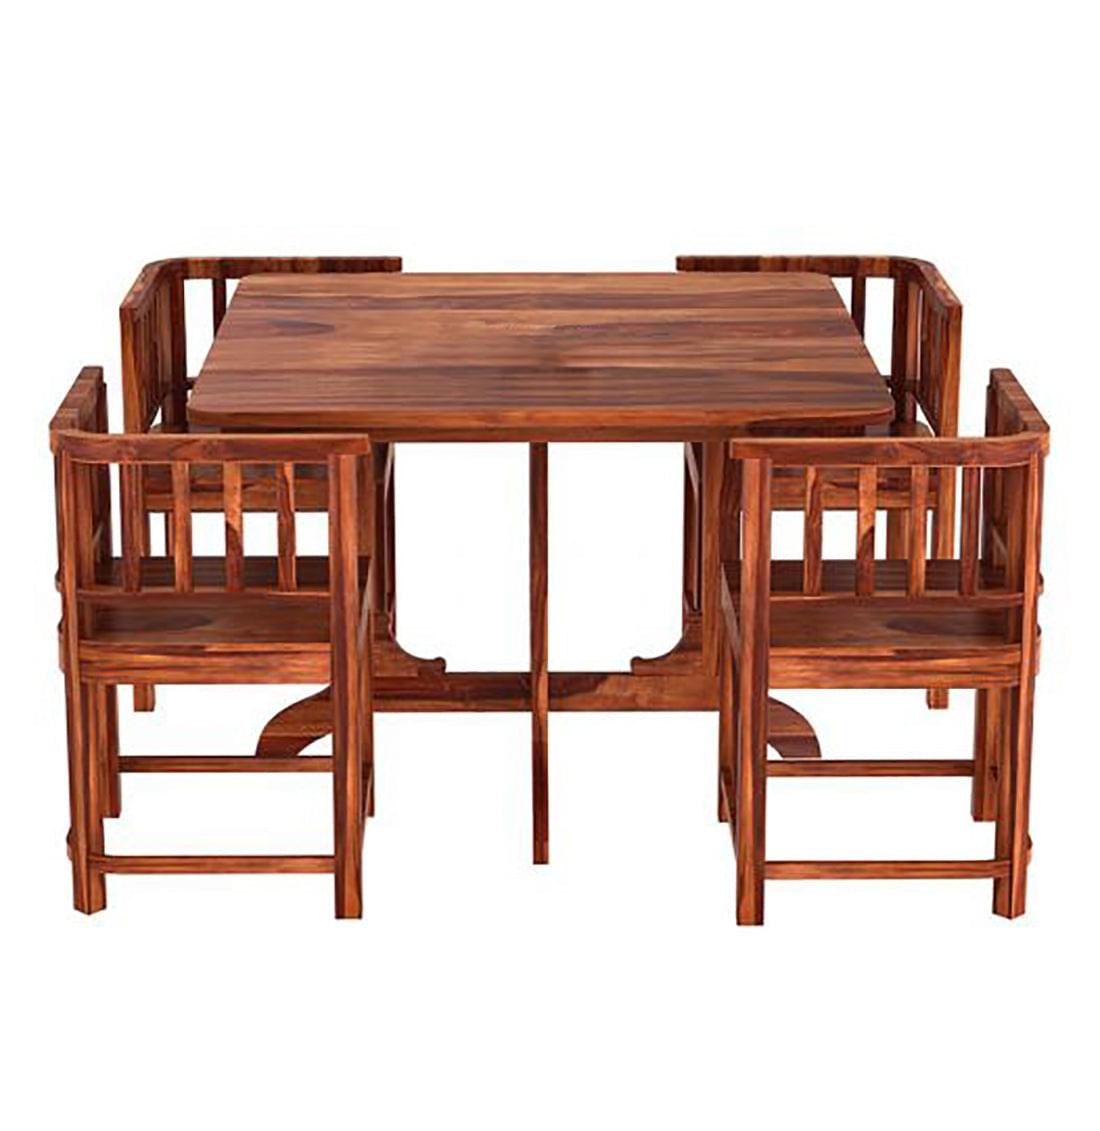 Alpha Compact Wooden 4 Seater Dining Table sets With Chairs & Table - Torque India